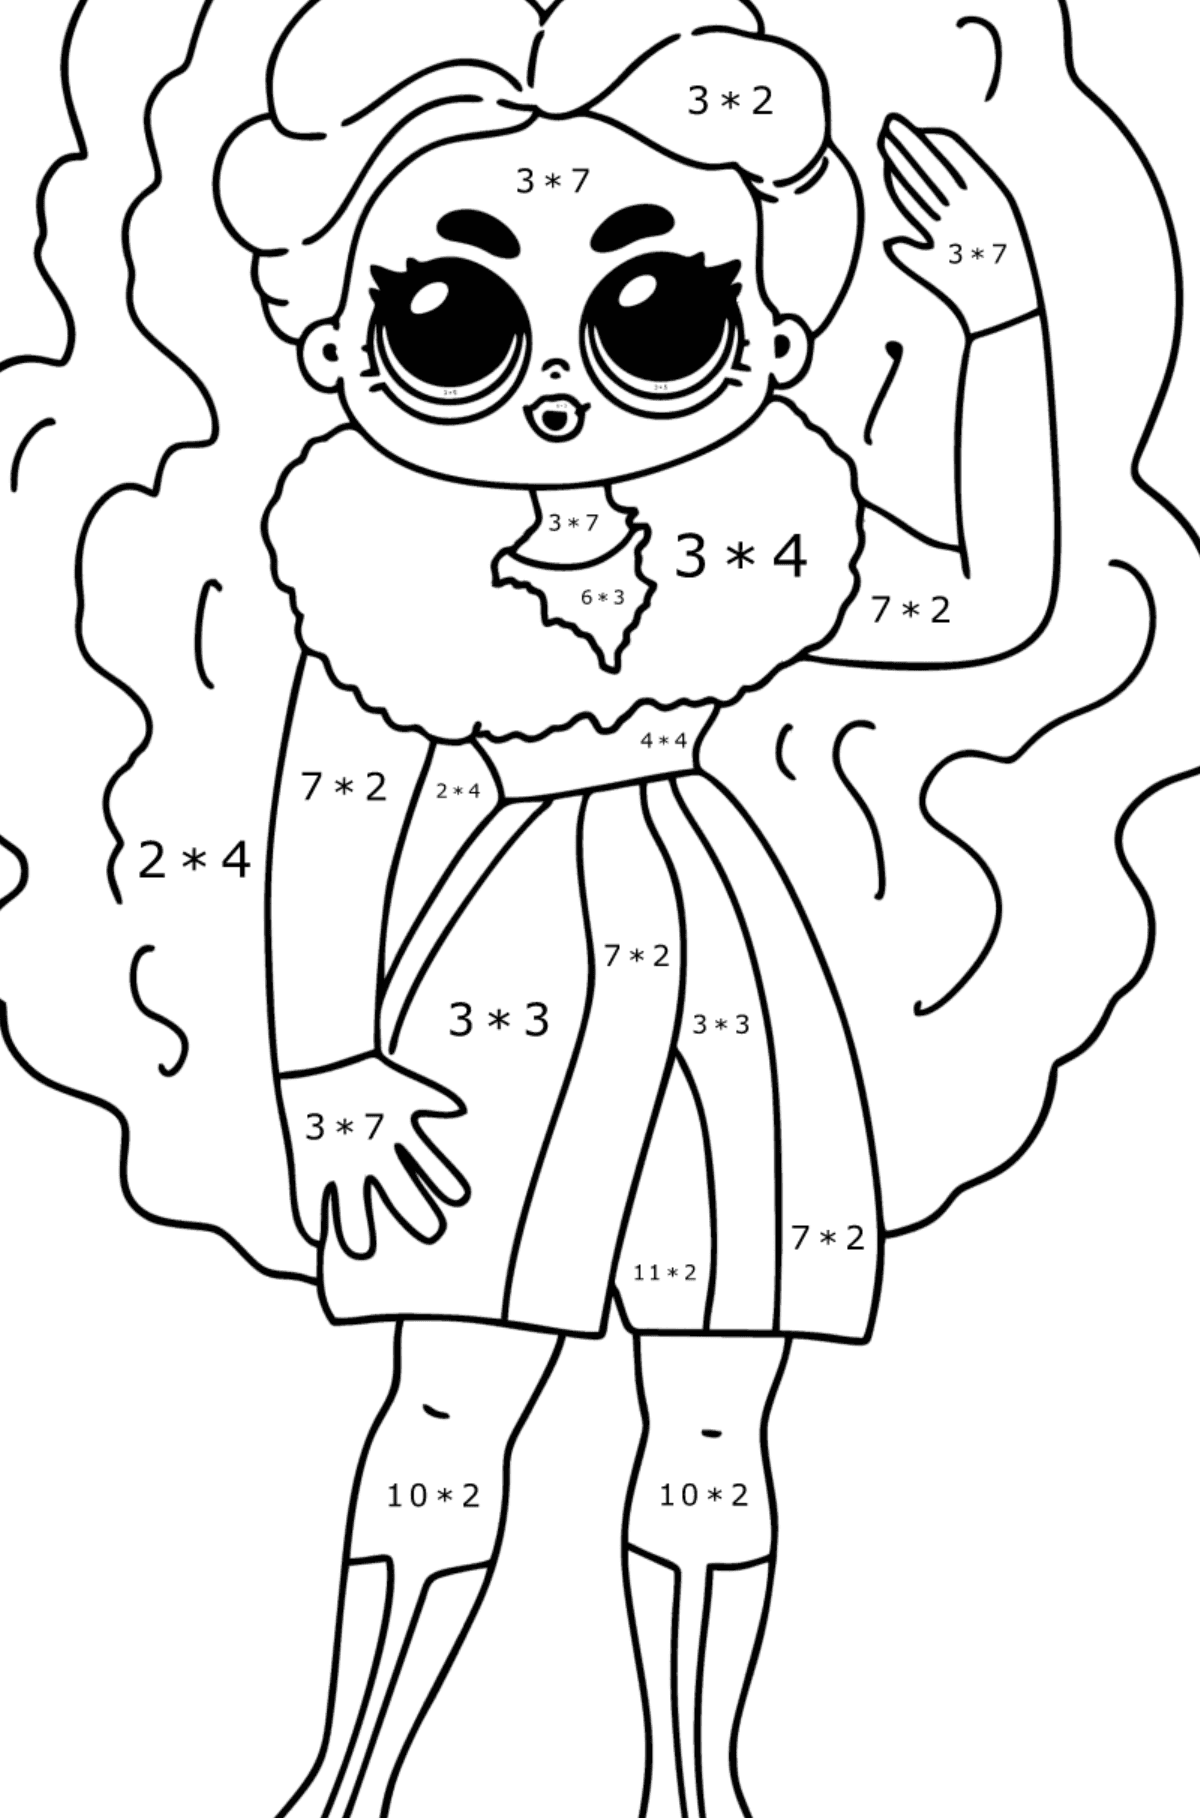 Coloring page LOL OMG Cute Girl - Math Coloring - Multiplication for Kids